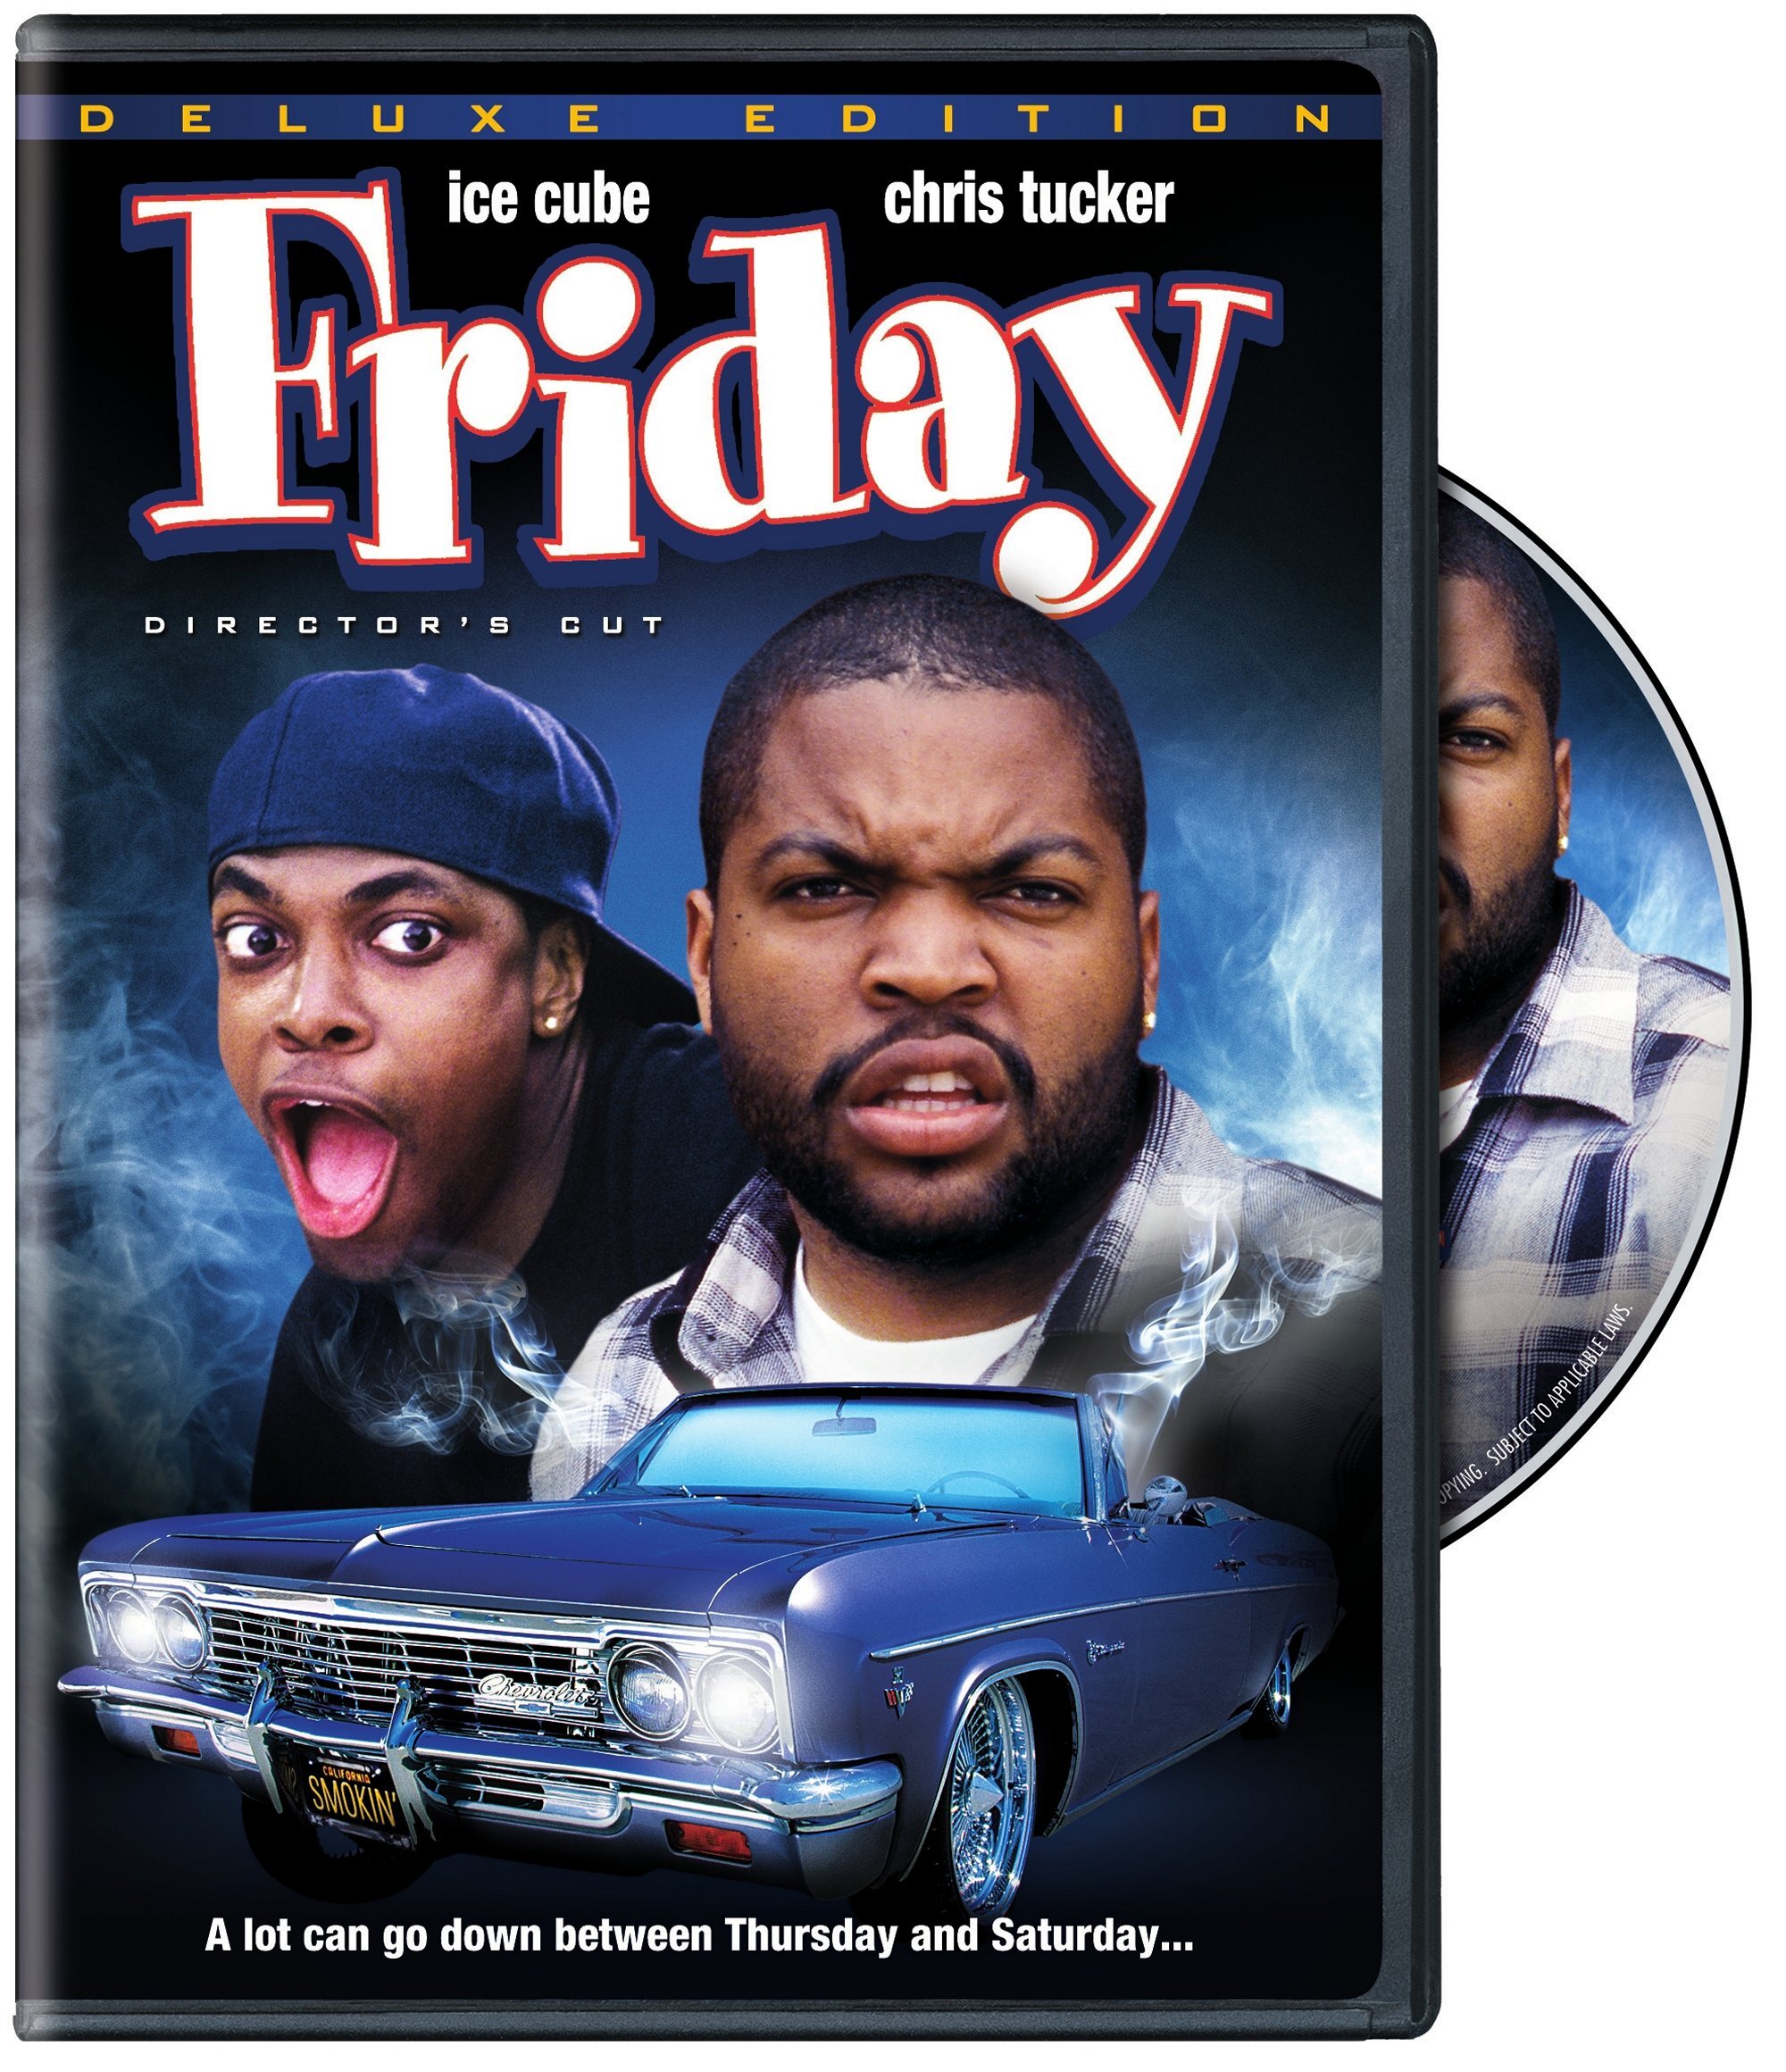 Friday (Deluxe Edition) - DVD [ 1995 ]  - Comedy Movies On DVD - Movies On GRUV